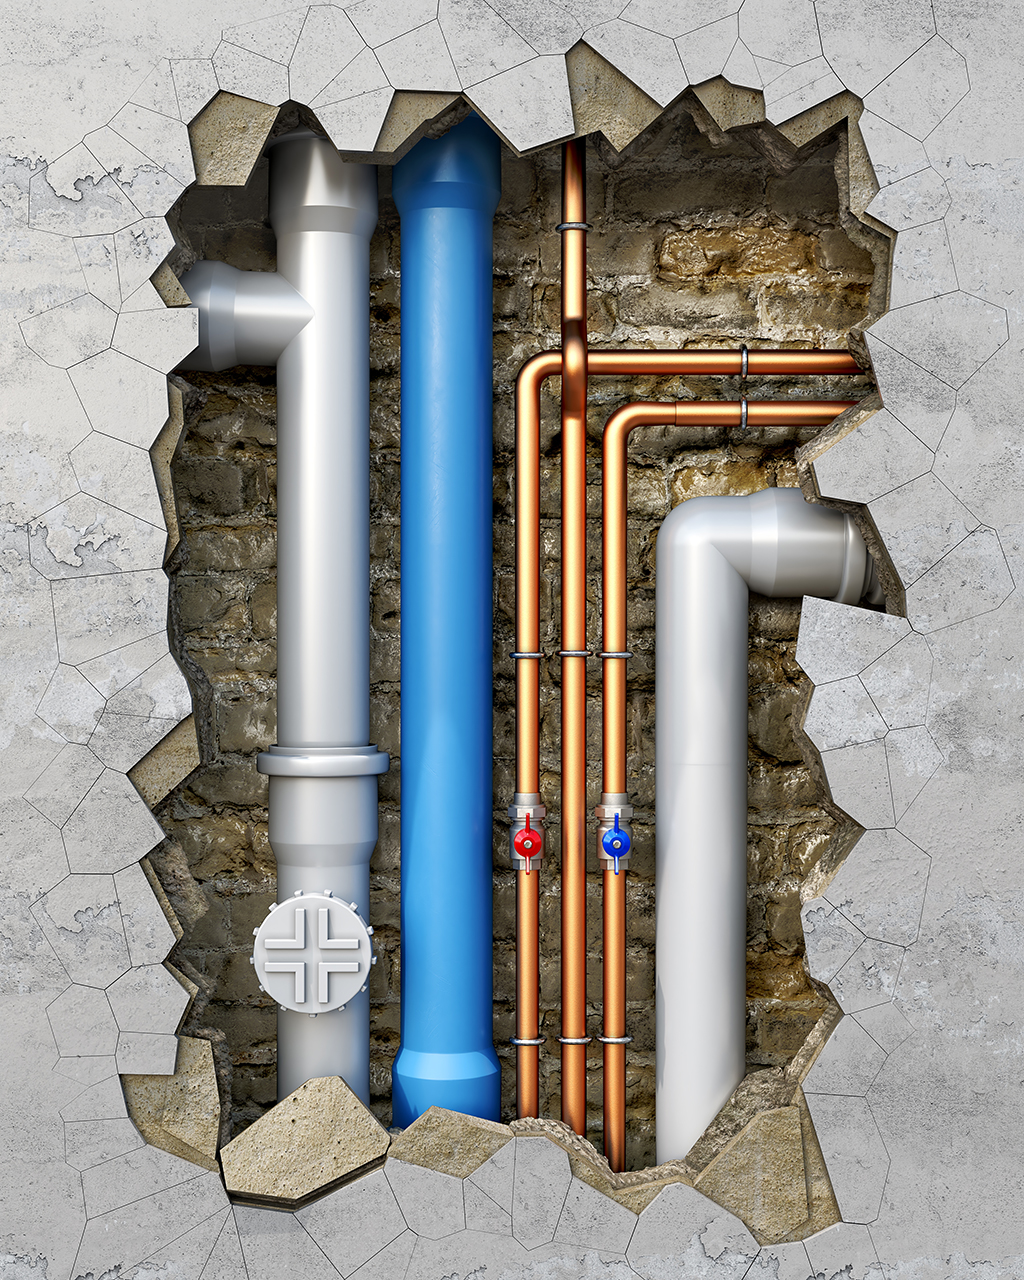 What Will A Plumber Diagnose As The Cause Of The Knocking Sounds In Your Piping? | Denton, TX